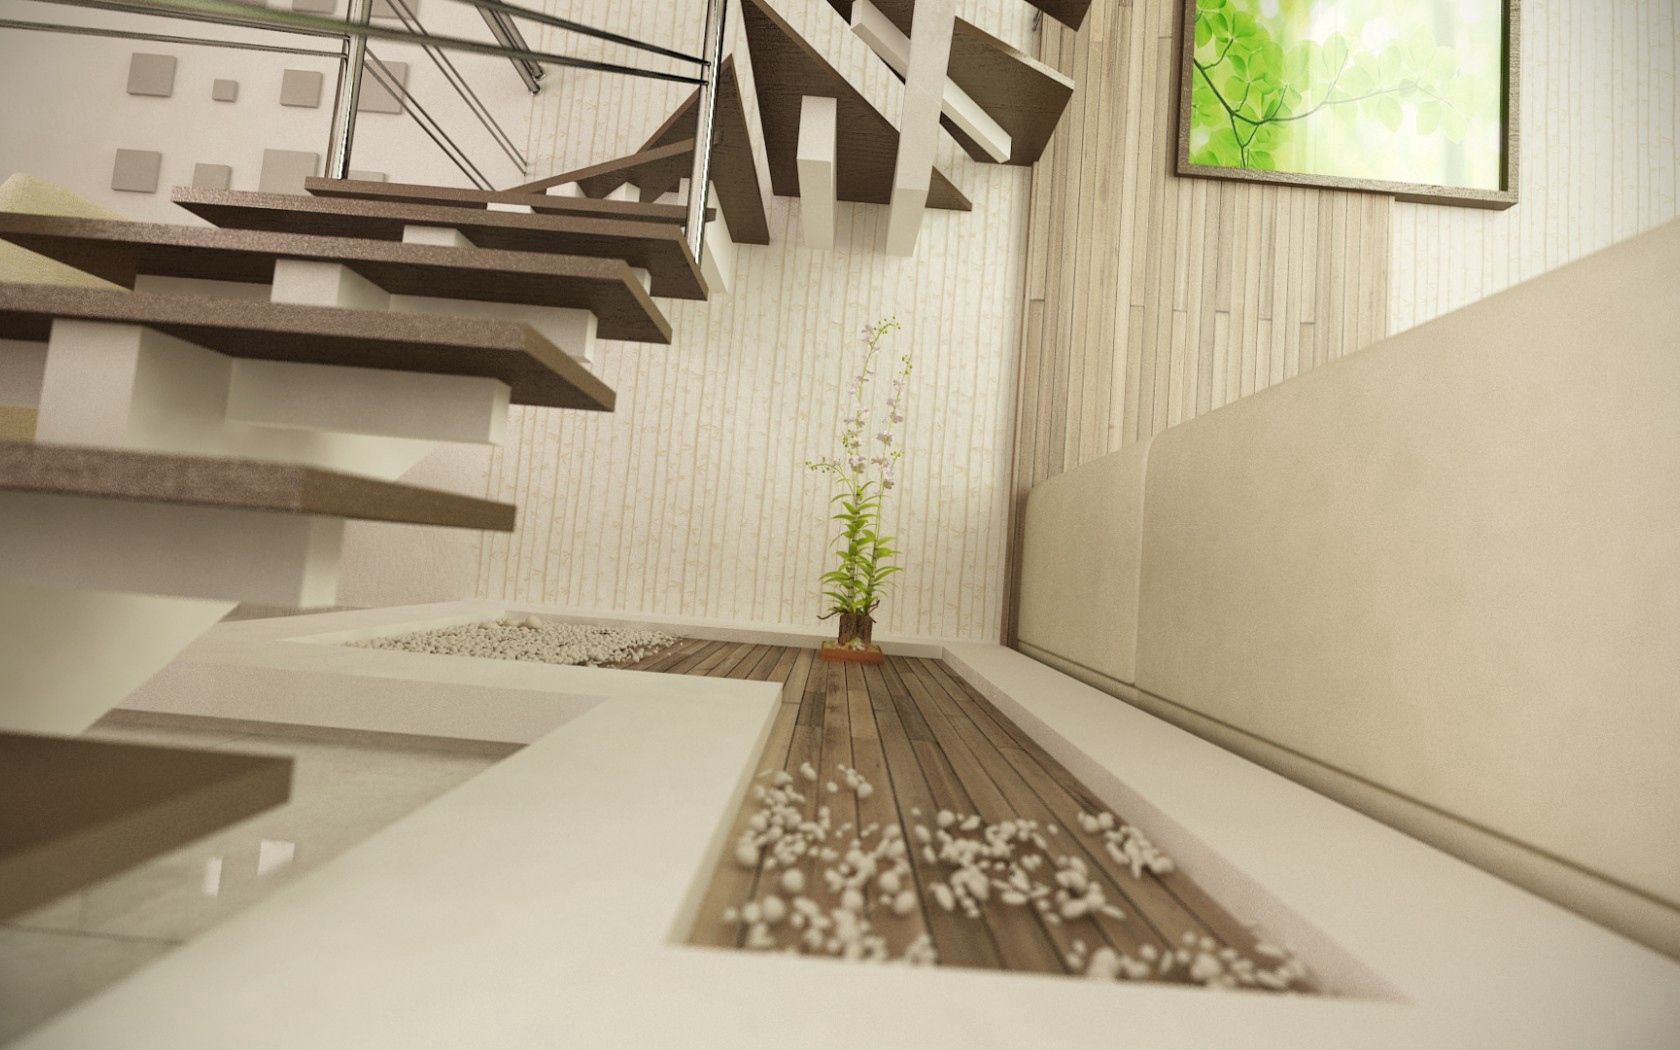 art, plant, miscellanea, miscellaneous, stairs, ladder, room, decor, steps, render